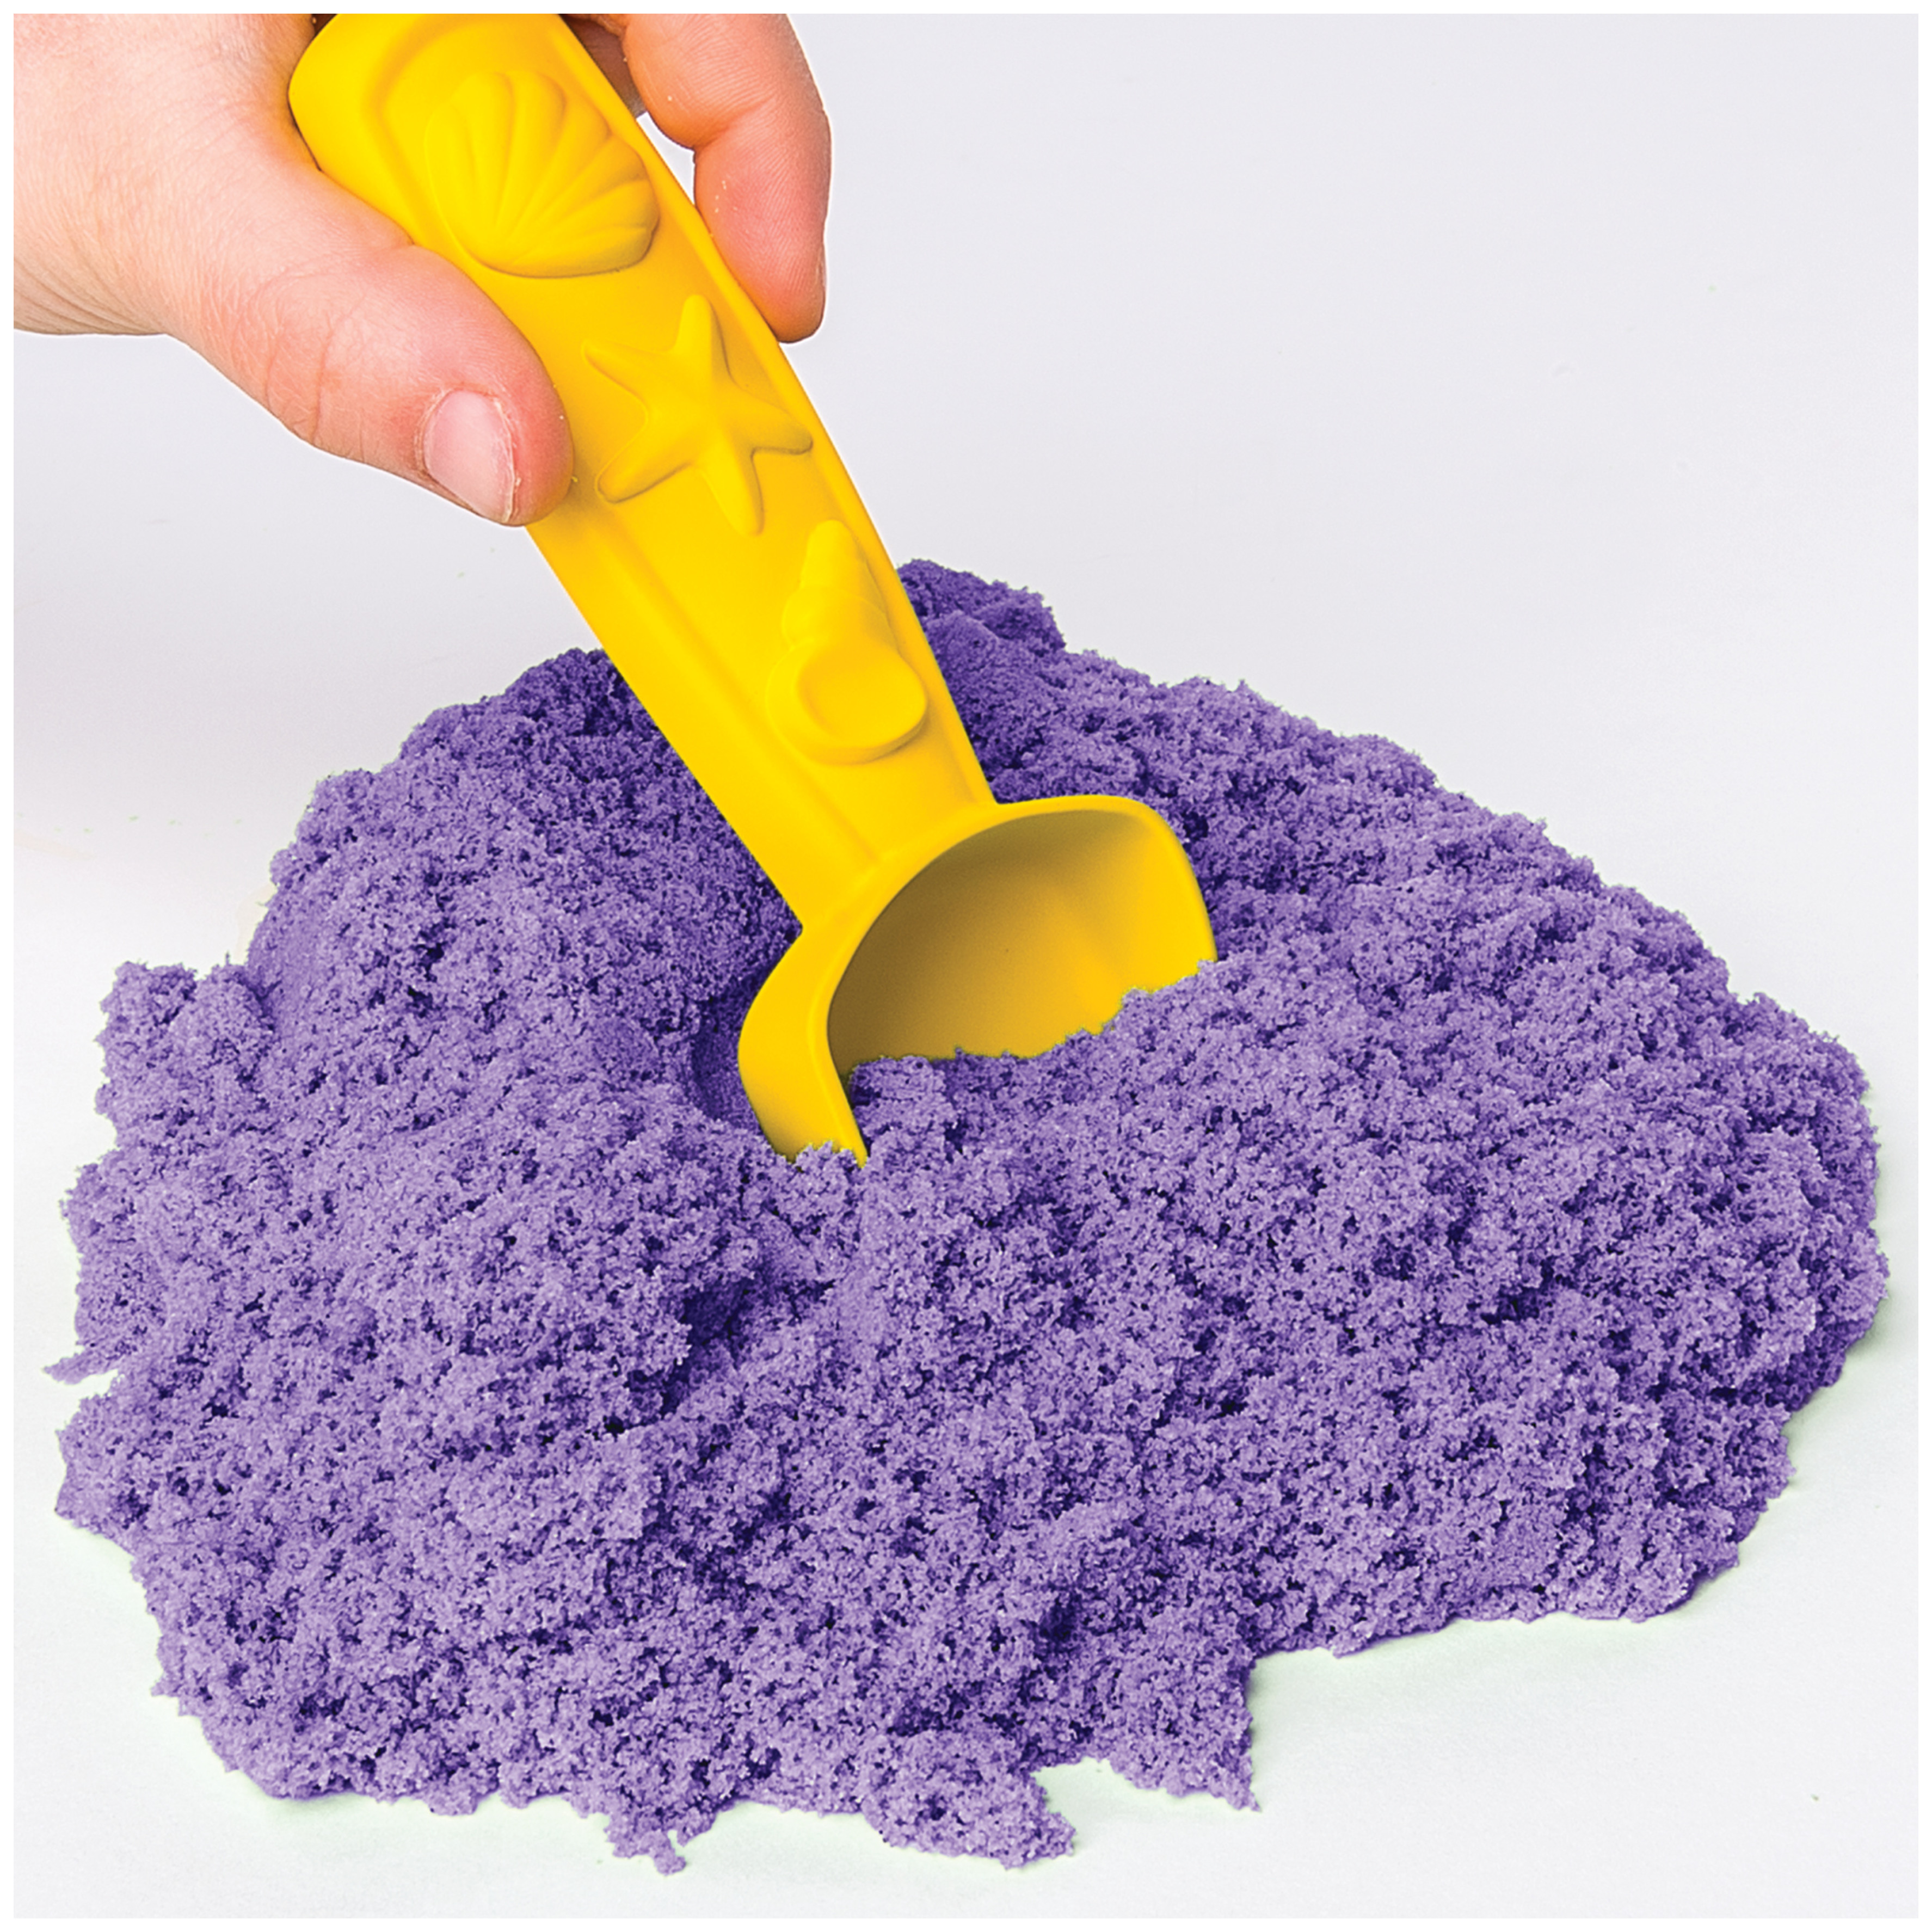 Kinetic Sand, Sandbox Playset with 1lb of Purple Kinetic Sand and 3 Molds, for Ages 3 and up - image 5 of 8